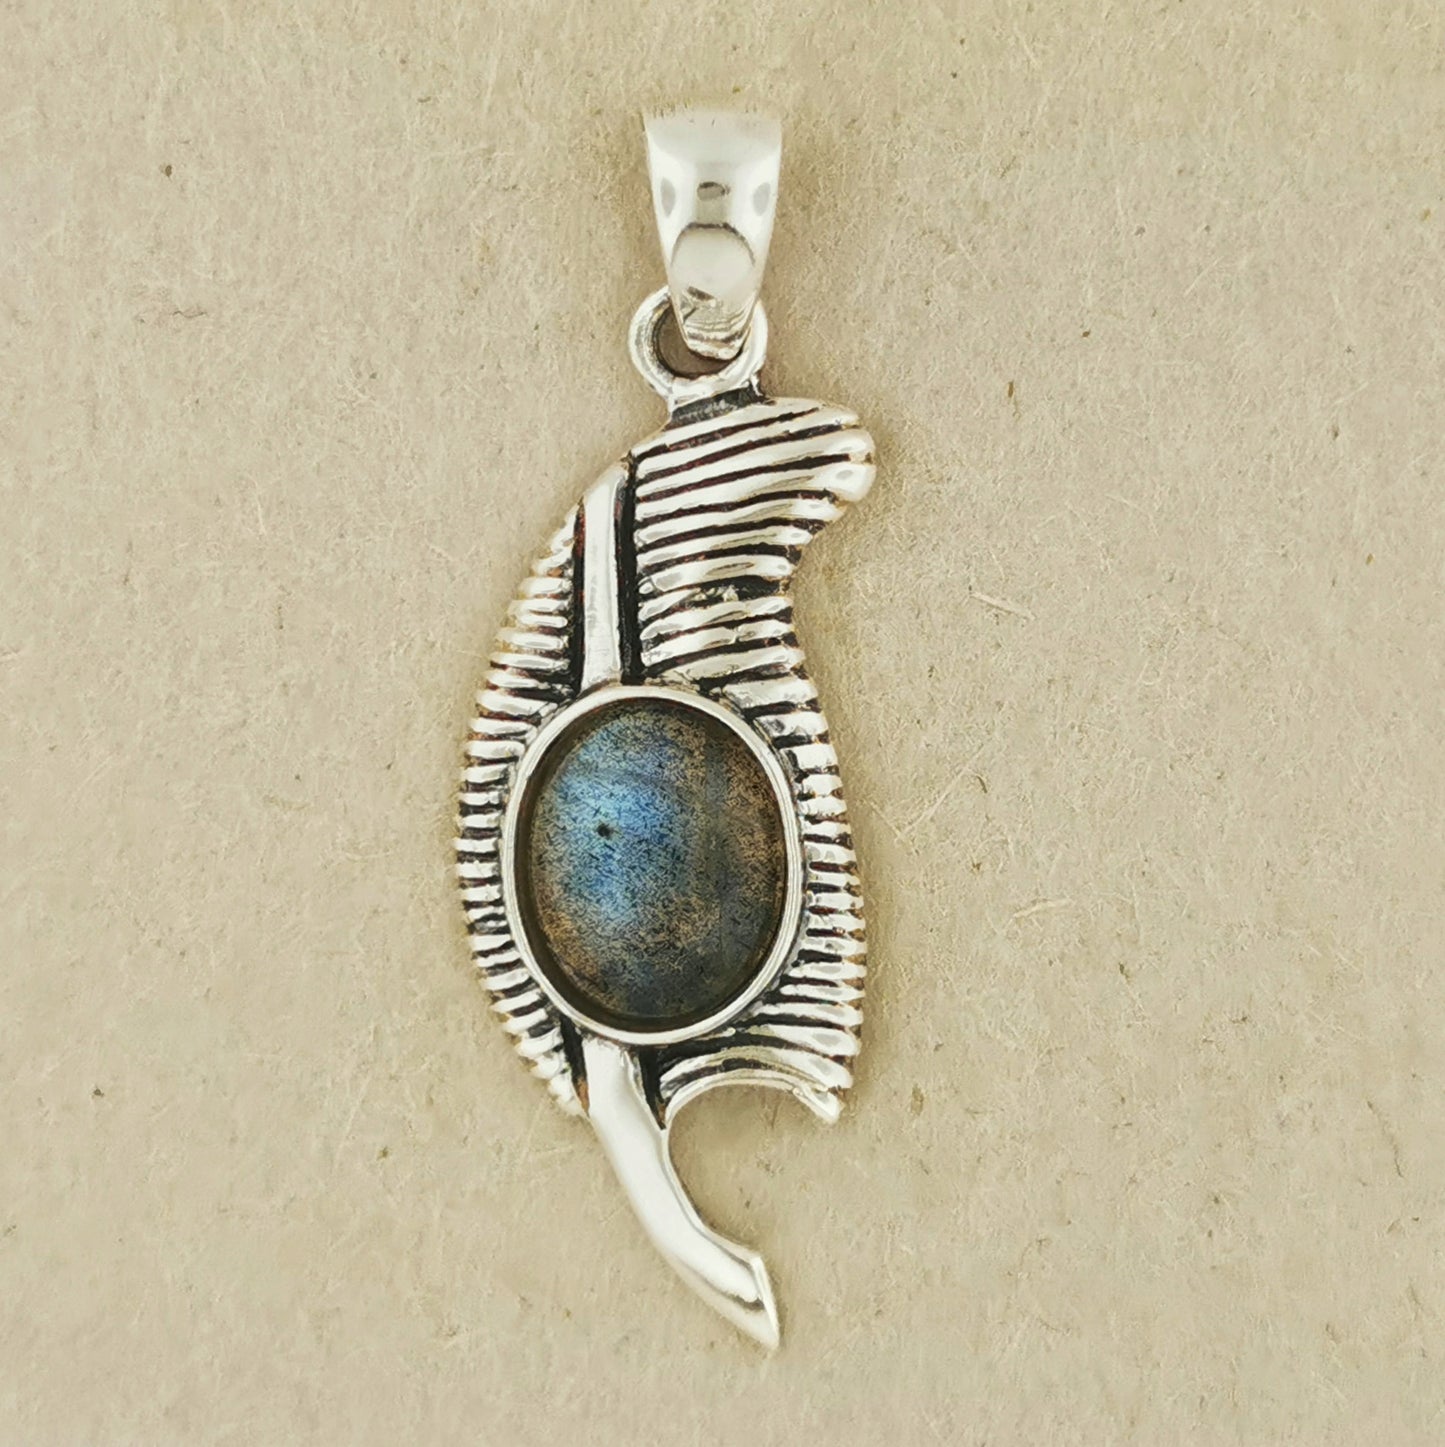 Feather of Ma'at Pendant in Sterling Silver with Labradorite, Egyptian Feather Pendant, Egyptian Goddess Pendant, Goddess of Truth Pendant, Silver Egyptian Feather Pendant, Silver Ma’at Pendant, Egyptian Silver Pendant, Silver Gemstone Egyptian Feather Pendant